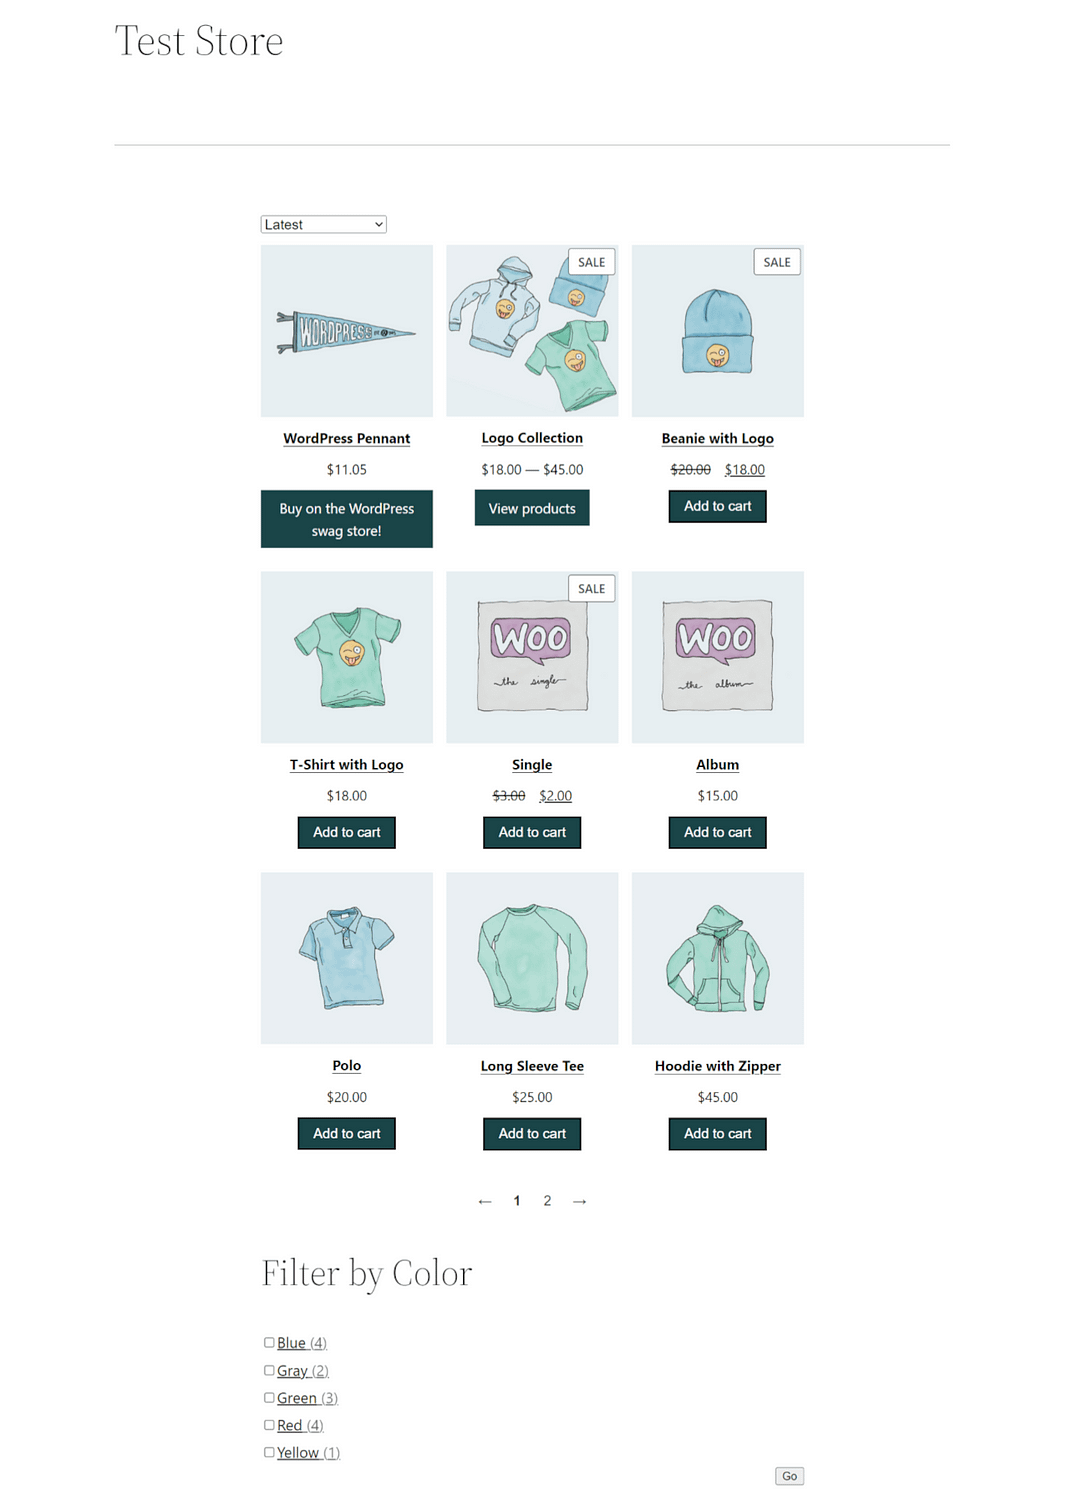 A WooCommerce store using a WooCommerce product filter block. 